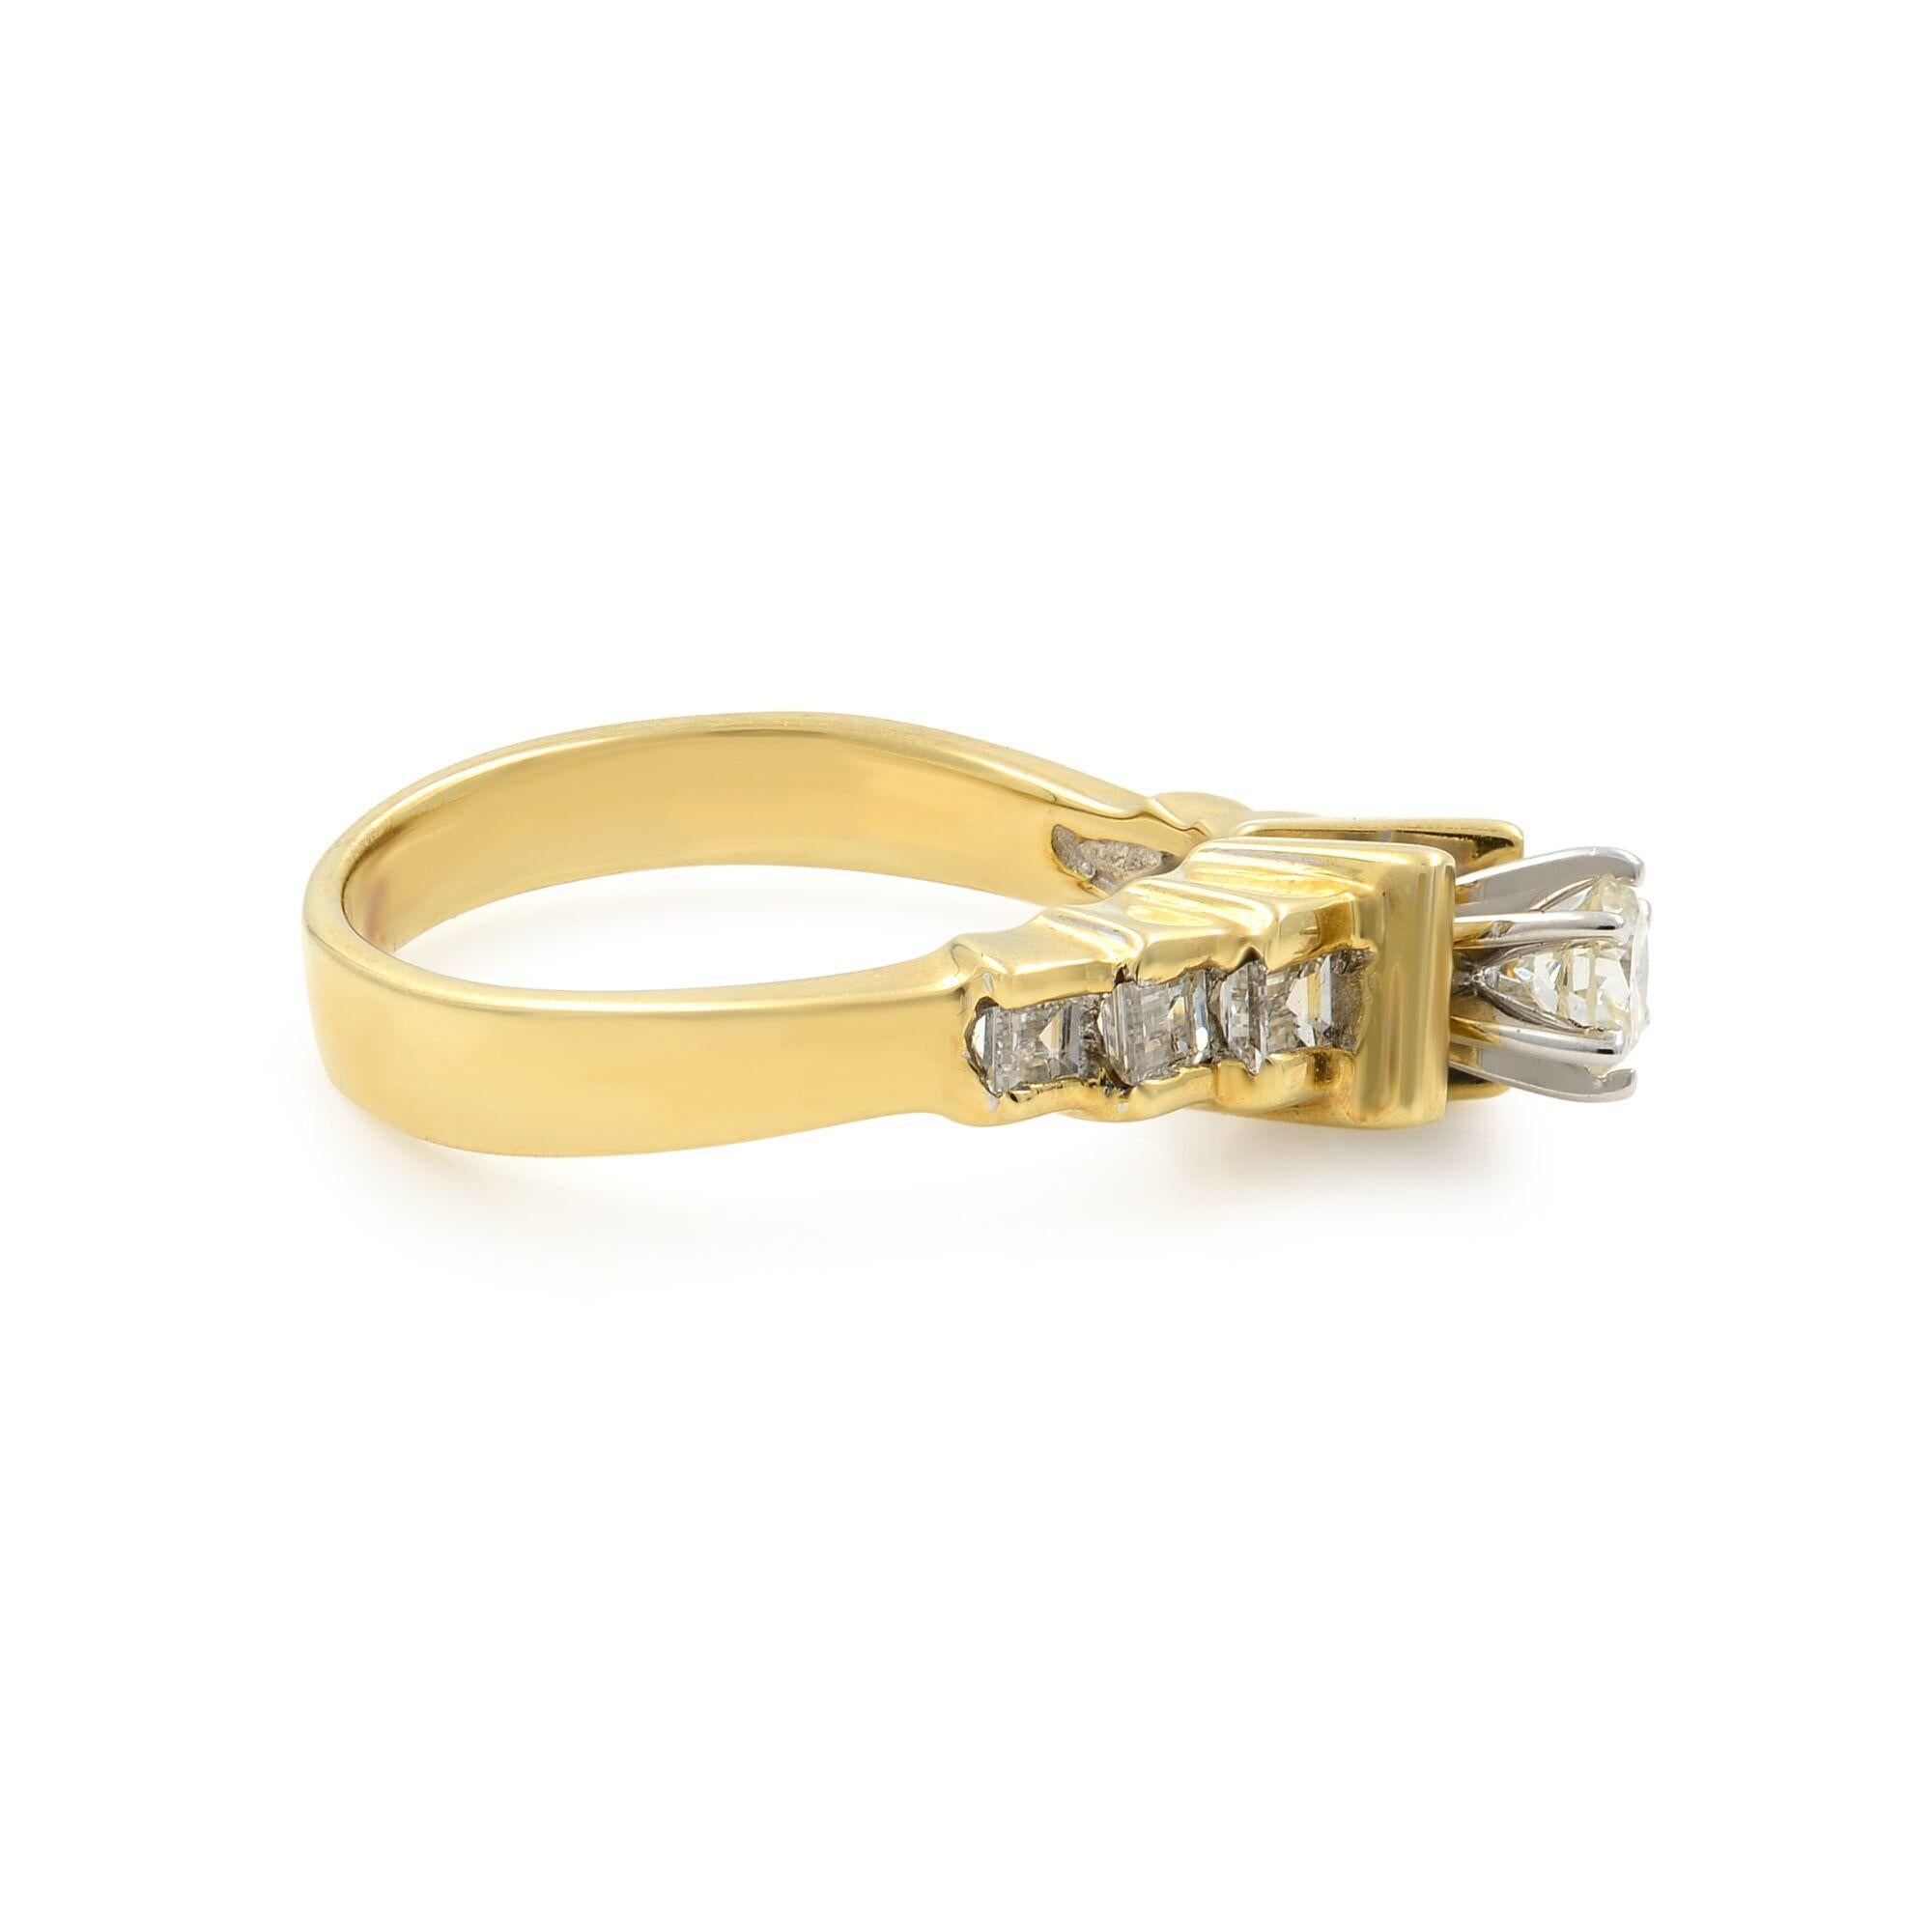 This beautiful ring is crafted in 14K yellow gold. Center stone: round cut white diamond weighing approx. 0.23 cttw.; accents stones: 6 princess cut white diamonds weighing approx. 0.39 cttw. Total diamond weight is 0.62 cts. Size of the ring is